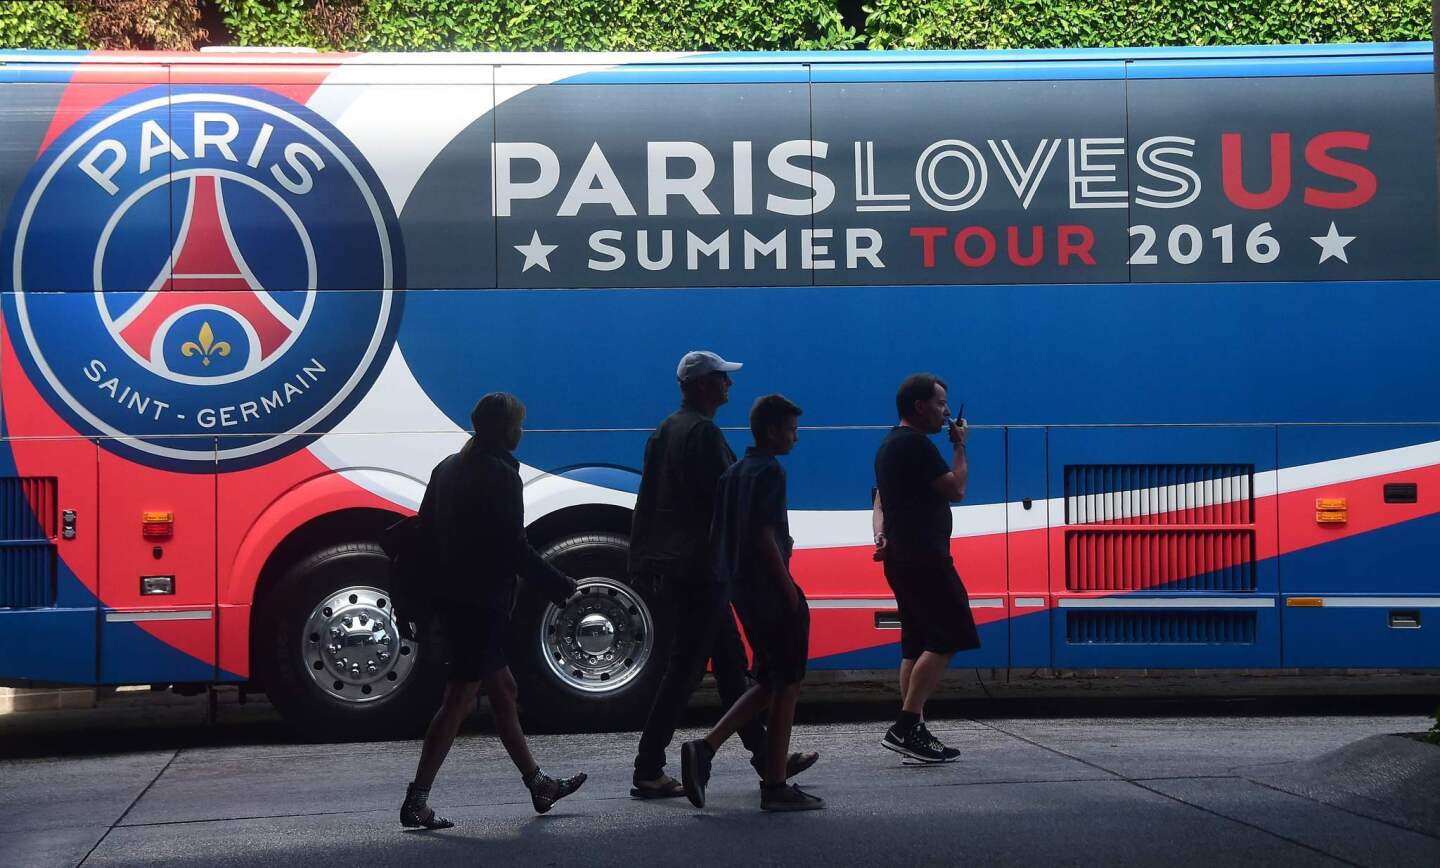 Pedestrians walk past the Paris Sant-Germain team bus transporting players to a training session at Loyola Marymount University in Los Angeles, California on July 26, 2016, one day ahead of their International Champions Cup soccer match against Real Madrid in Columbus, Ohio. The squad will return to California following that encounter for a July 30 match against Leicester City in Carson, California. / AFP PHOTO / Frederic J. BROWNFREDERIC J. BROWN/AFP/Getty Images ** OUTS - ELSENT, FPG, CM - OUTS * NM, PH, VA if sourced by CT, LA or MoD **